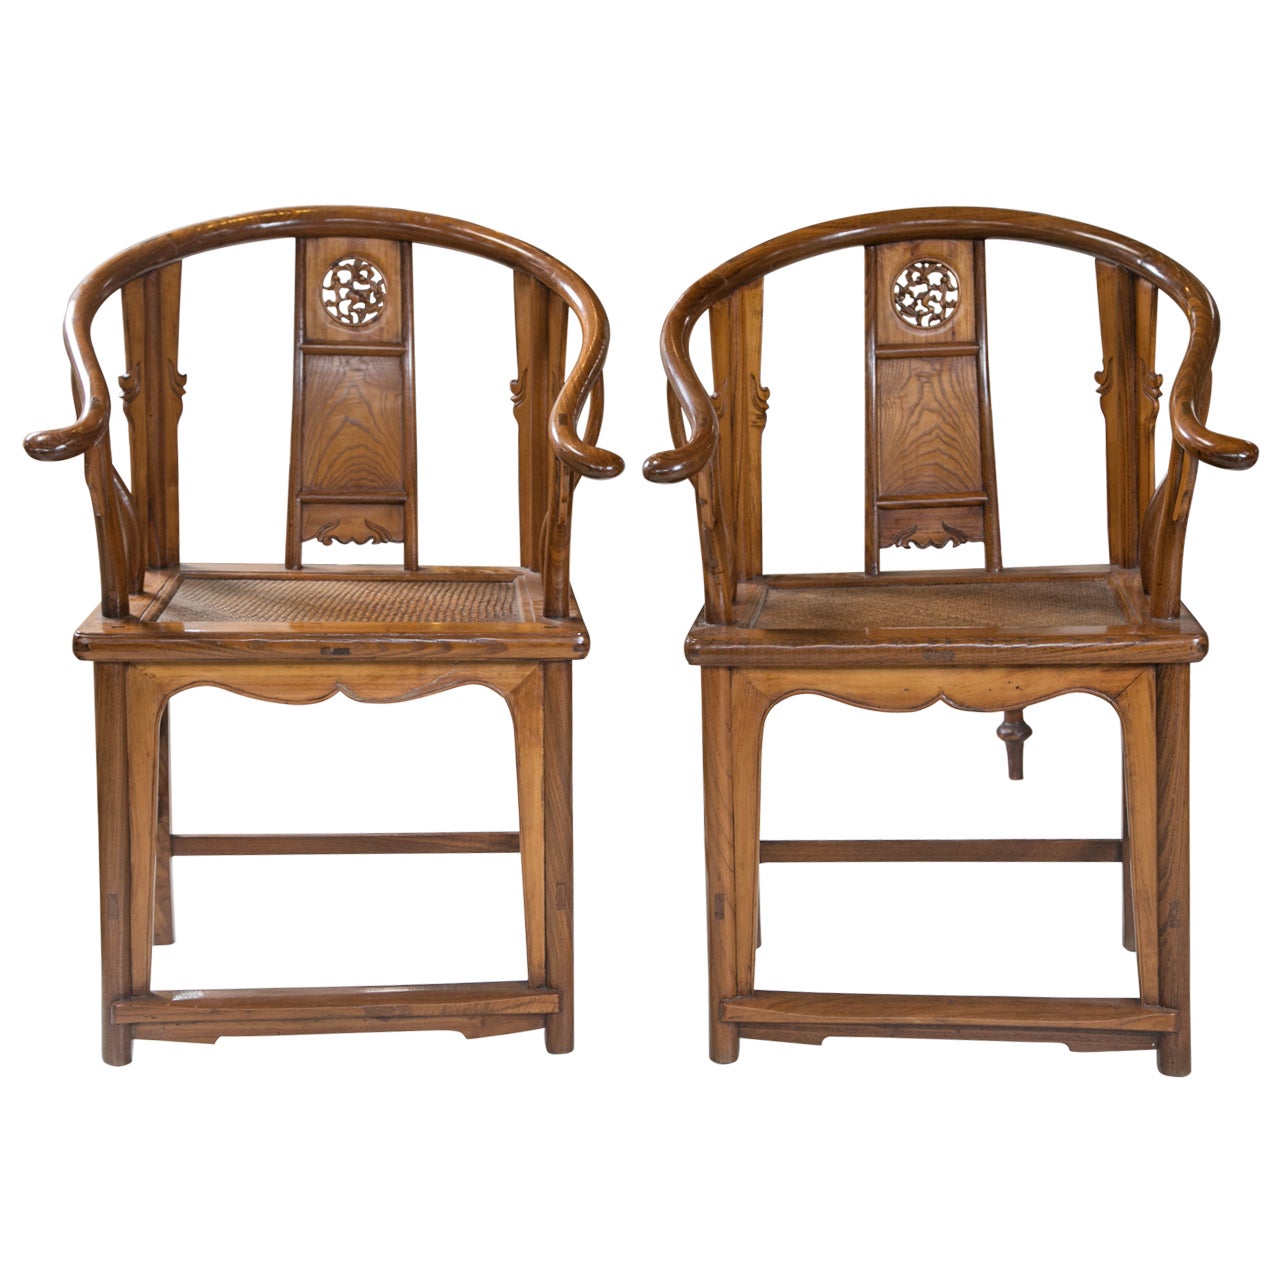 Pair of Antique Chinese Horse Shoe Back Chairs